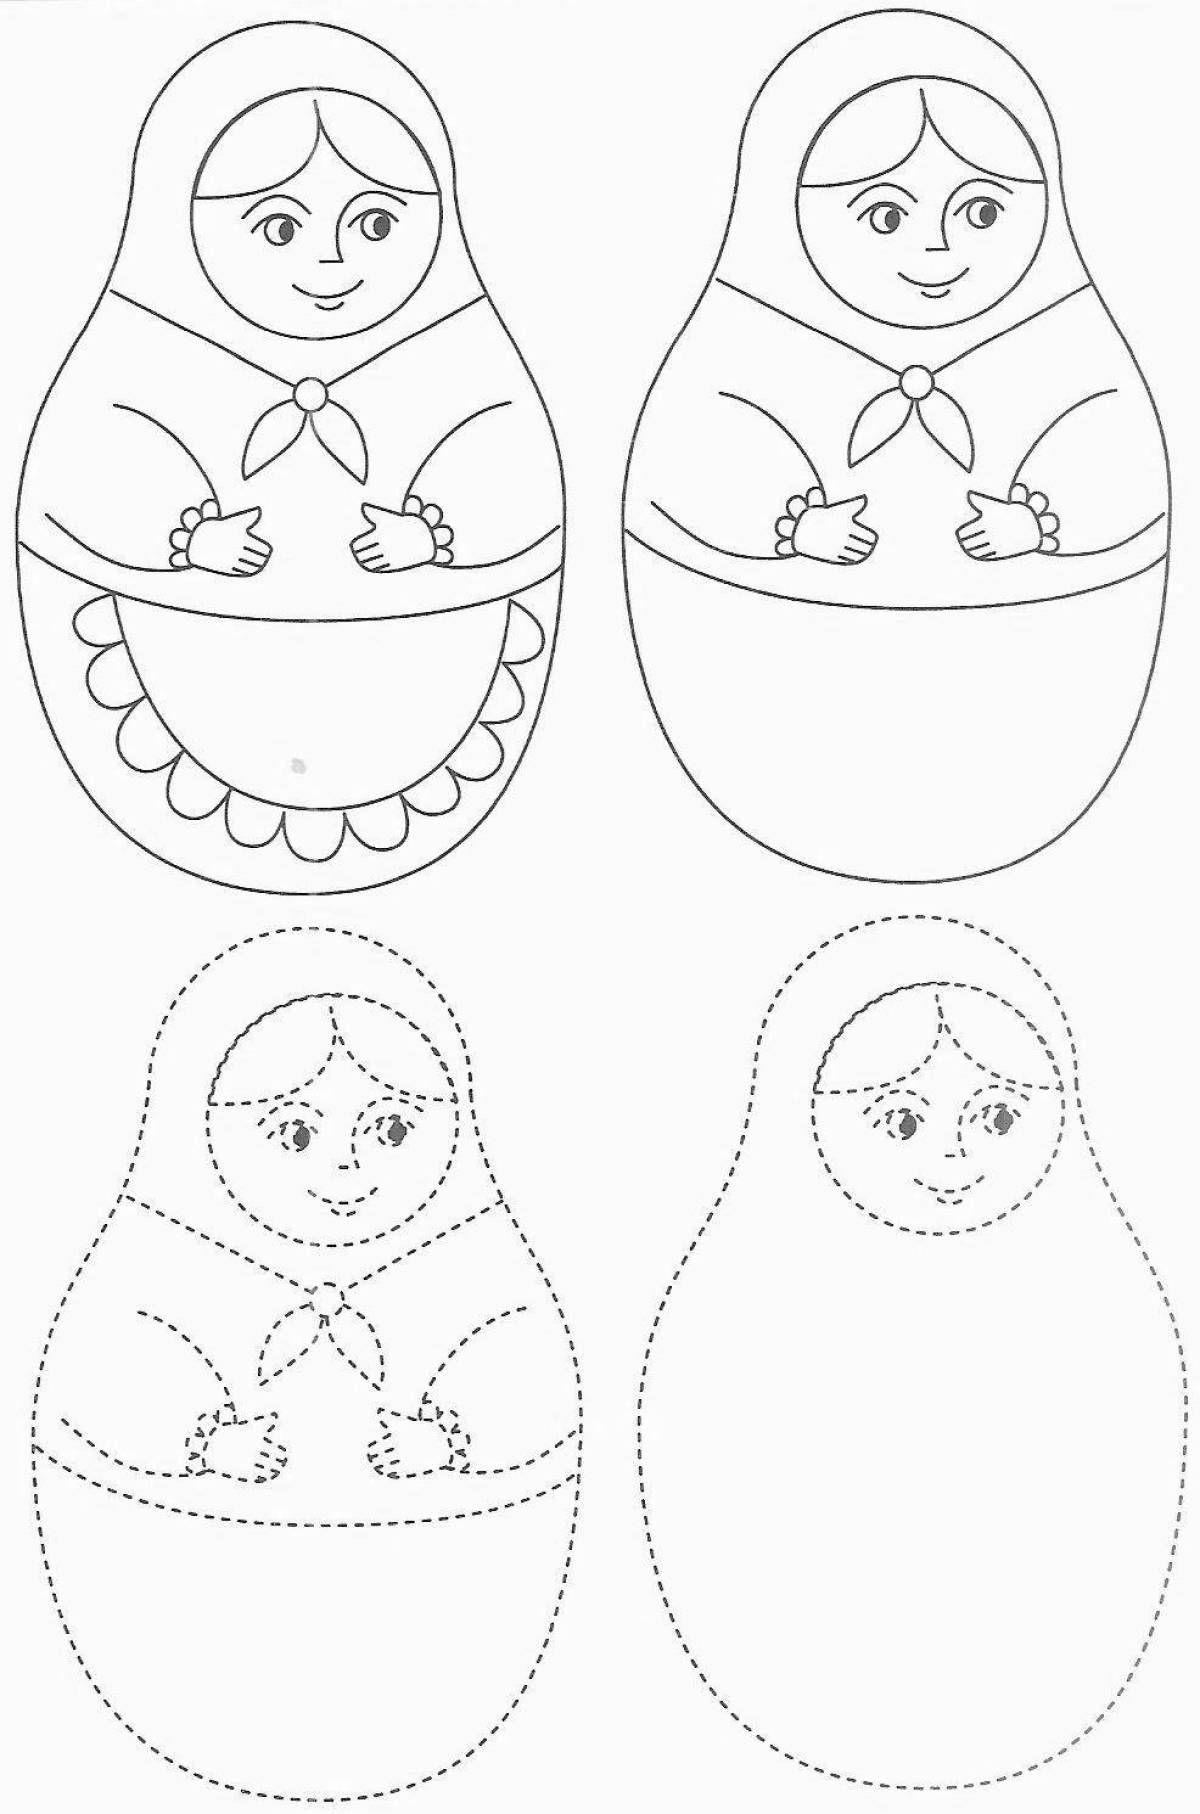 Colorful matryoshka coloring book for children 5-6 years old